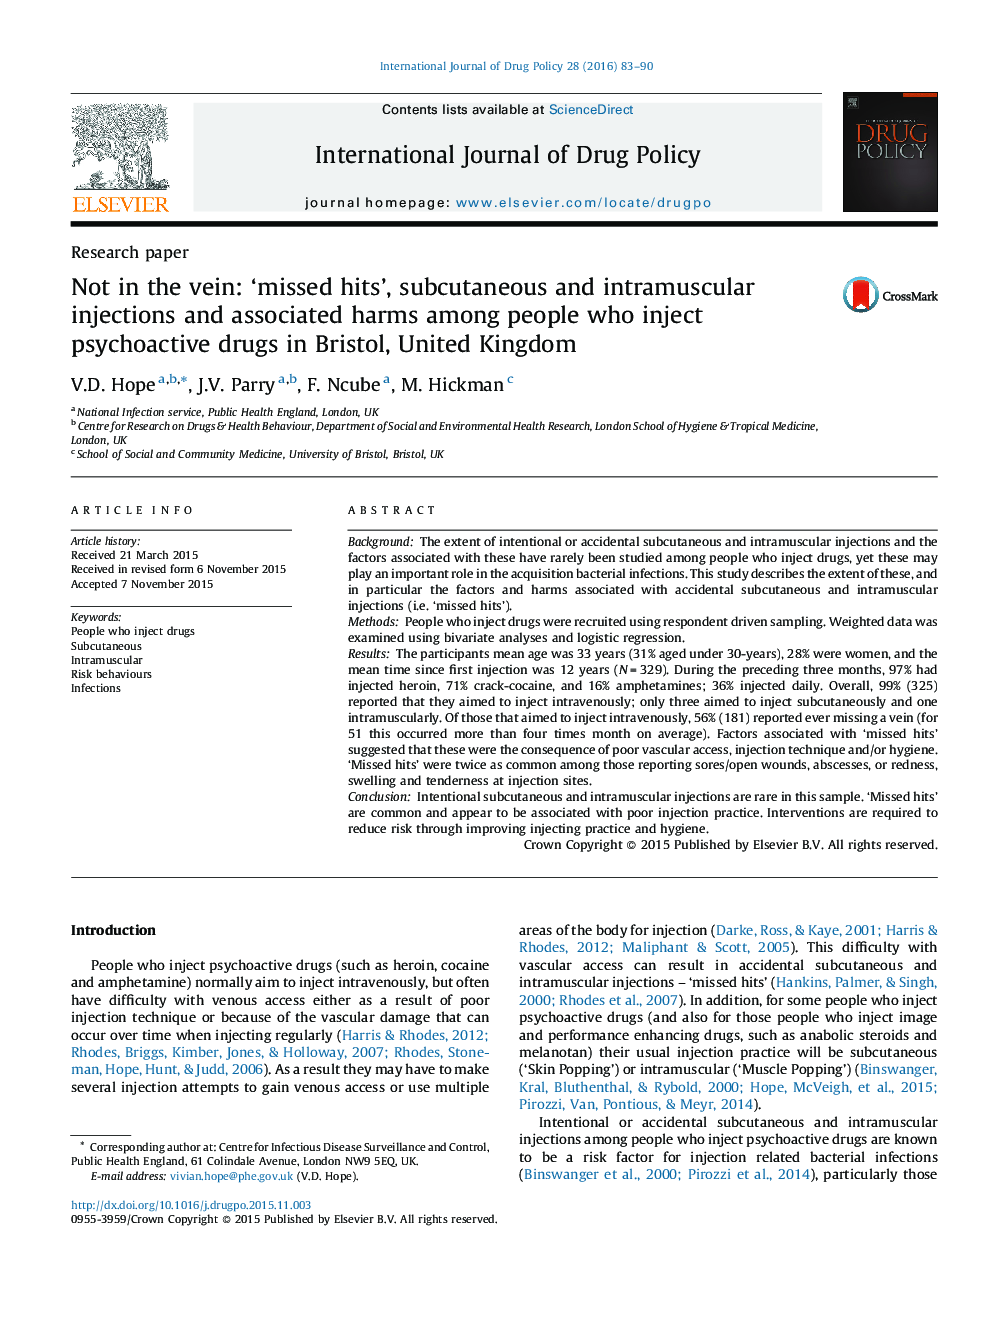 Not in the vein: ‘missed hits’, subcutaneous and intramuscular injections and associated harms among people who inject psychoactive drugs in Bristol, United Kingdom